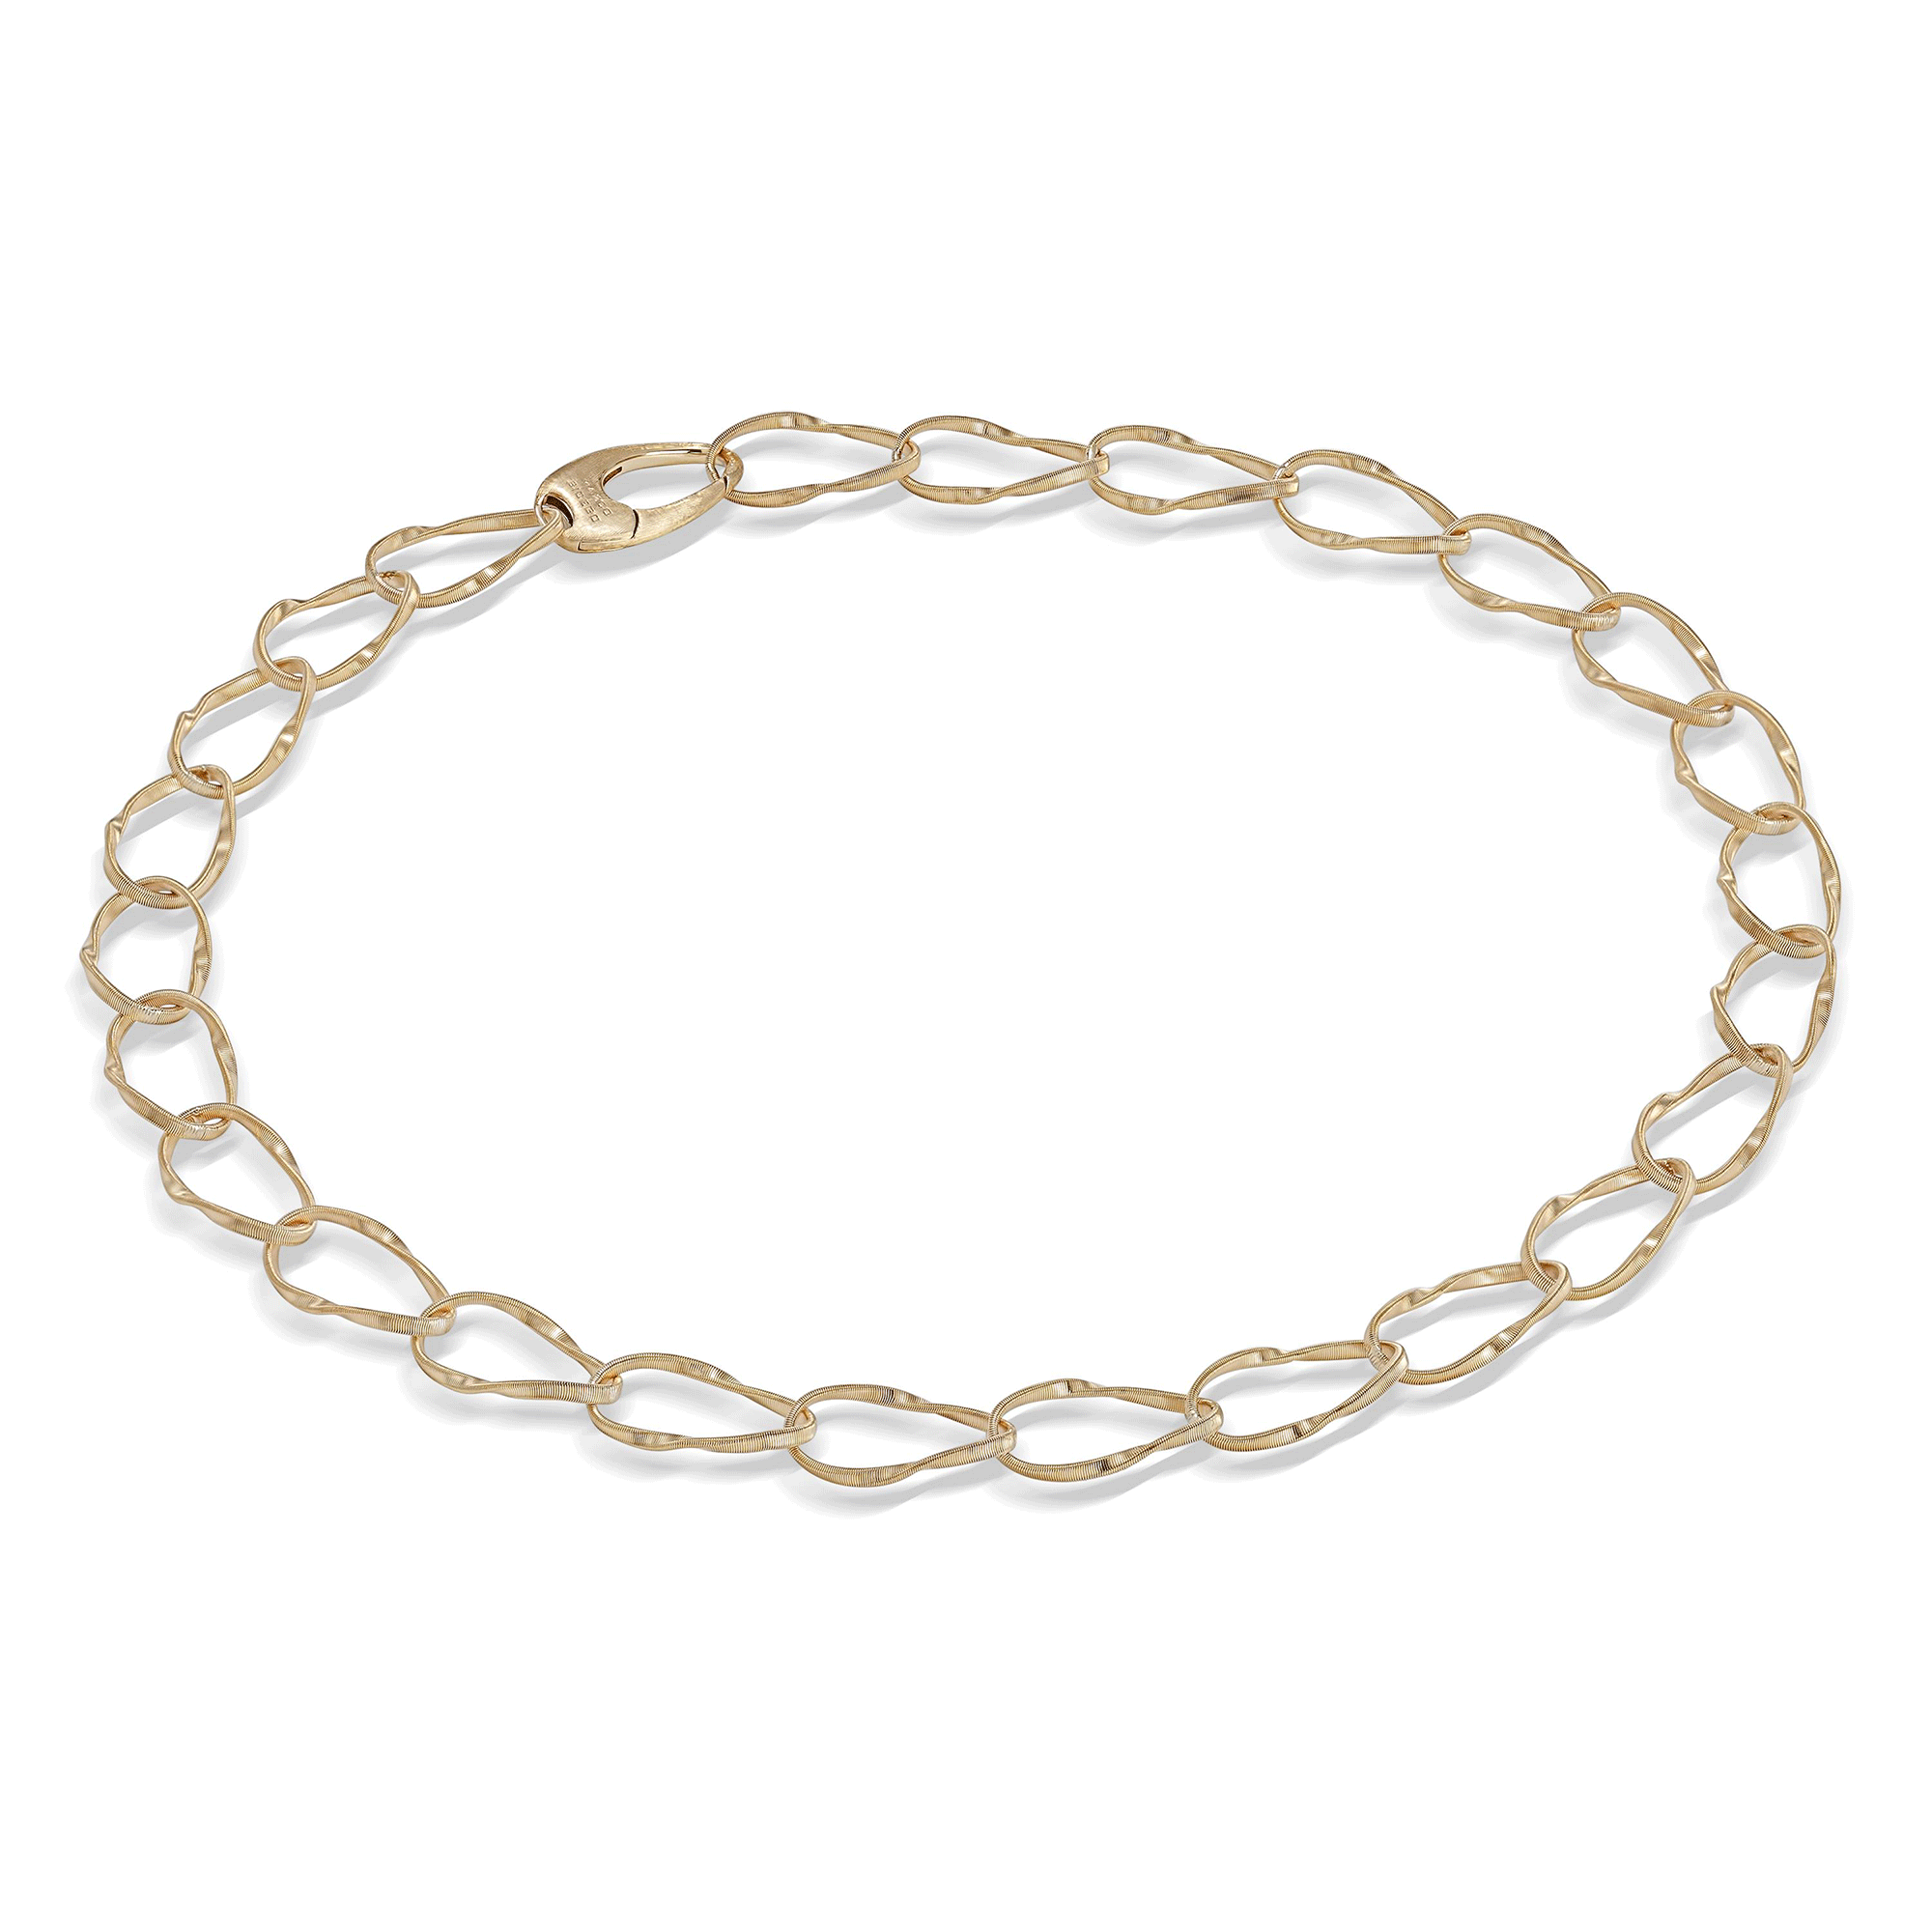 Marrakech Onde 18ct Yellow Gold Necklace